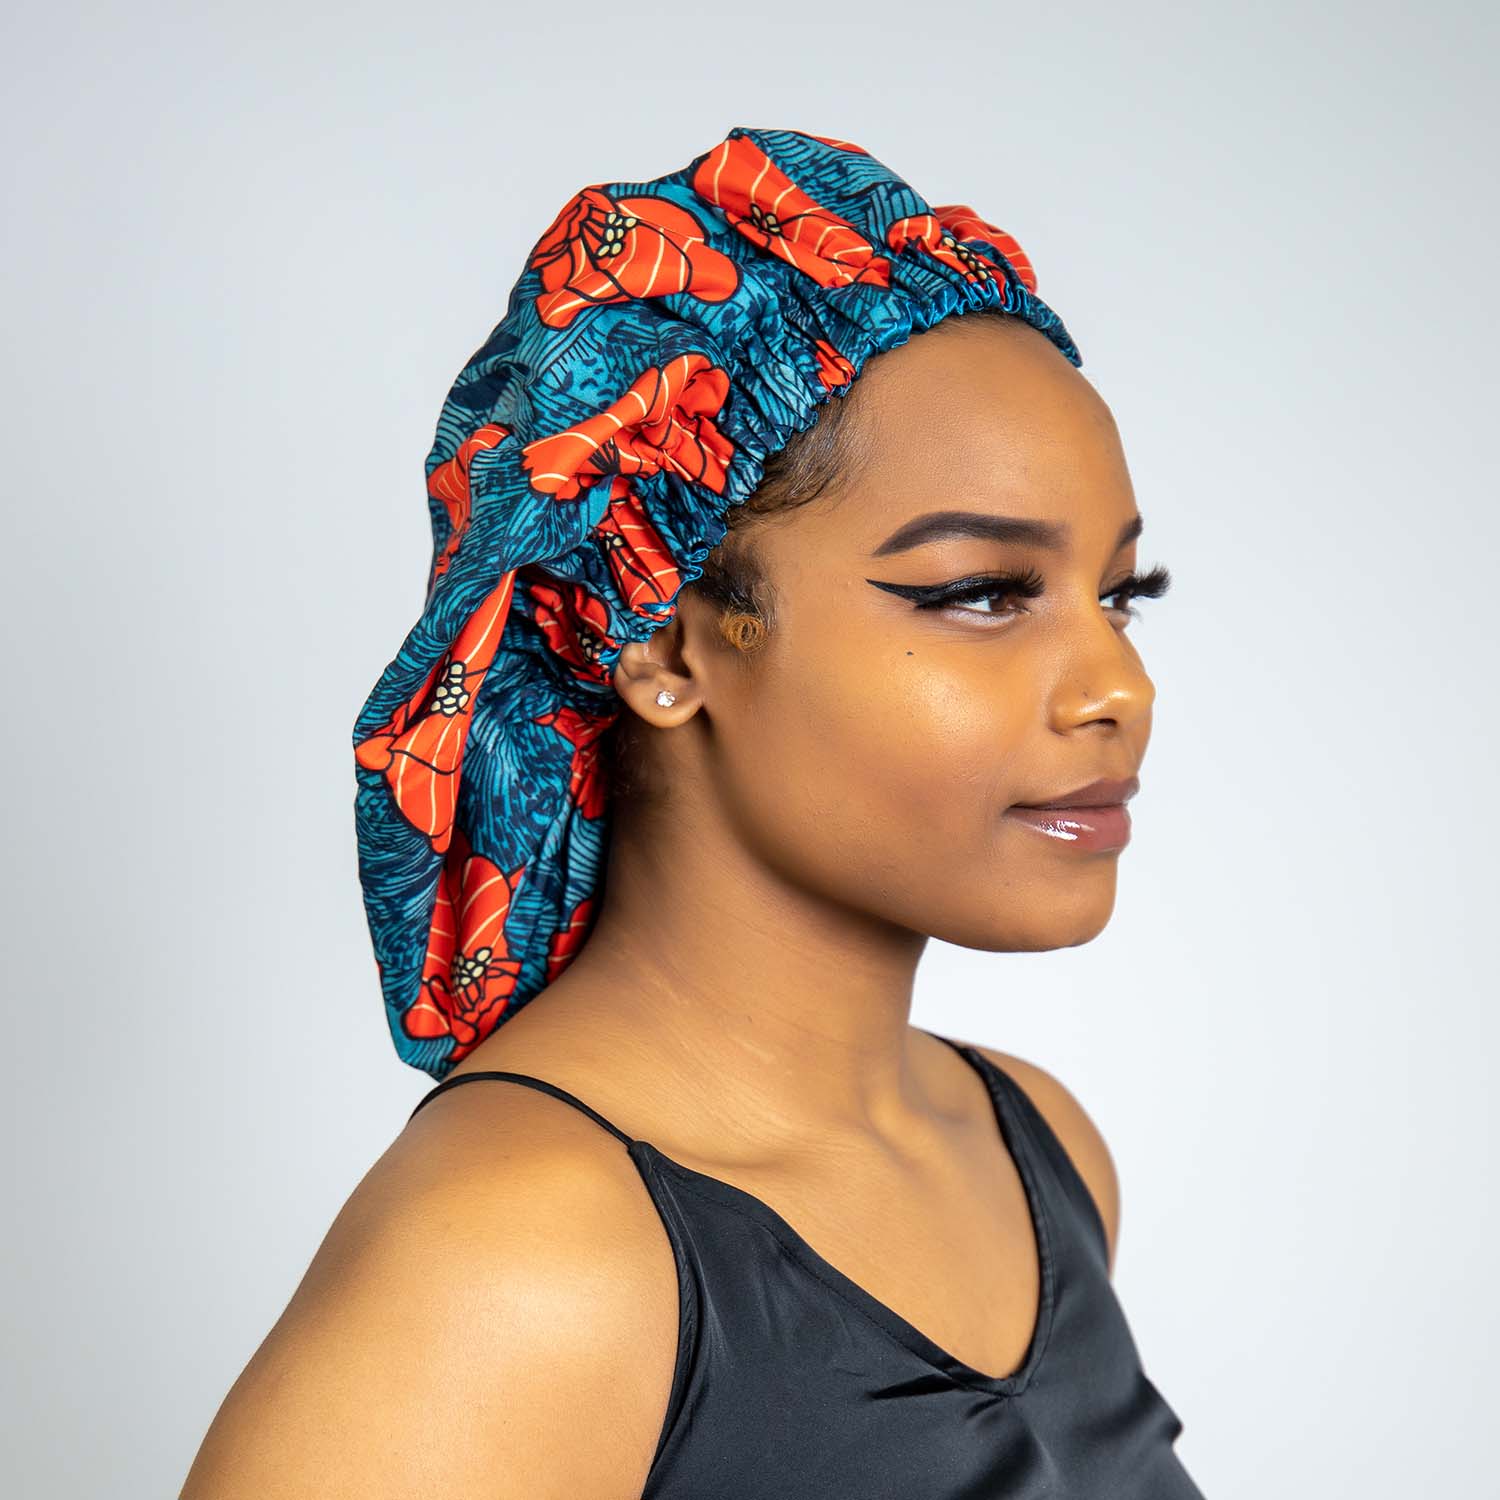 Customized Hair Bonnet in Alimosho - Clothing Accessories, Vivian